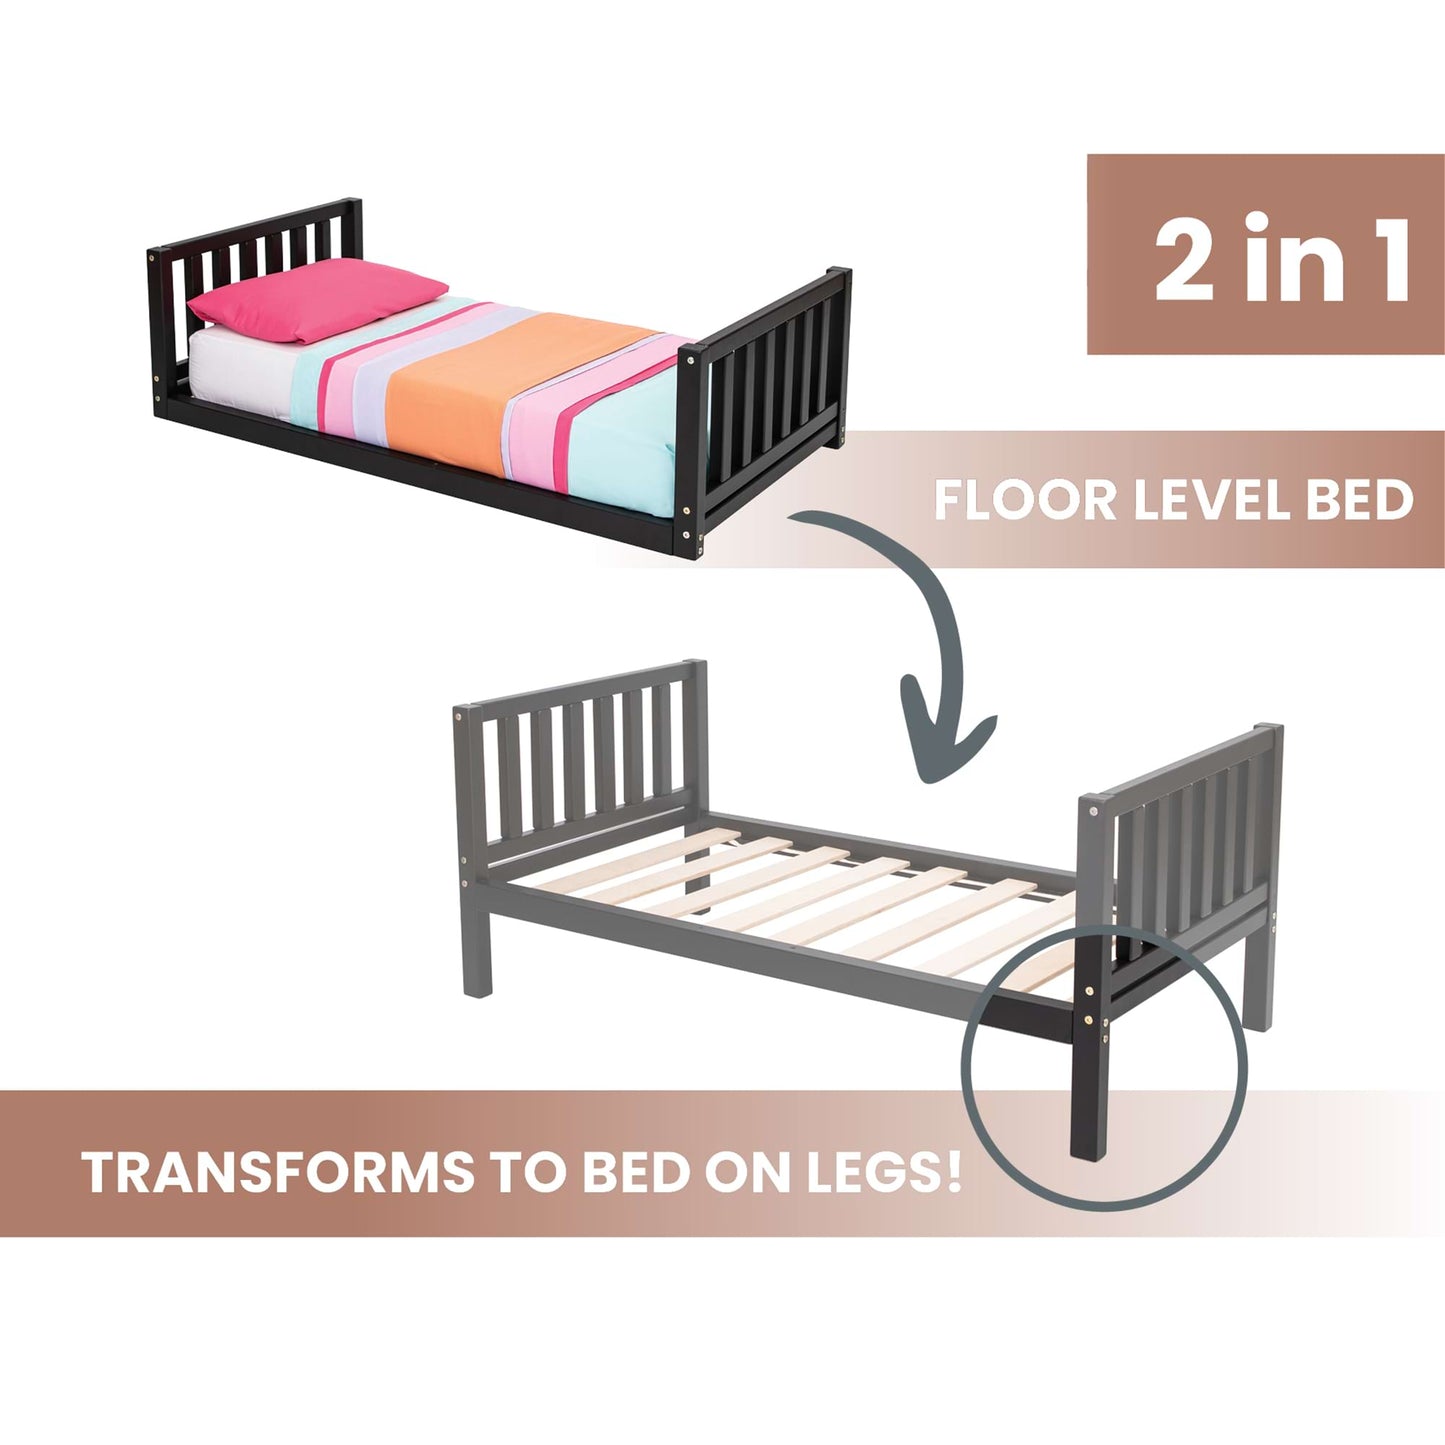 This 2-in-1 kid's bed on legs with a vertical rail headboard and footboard is made from solid pine or birch wood and is designed as a floor-level children's bed.